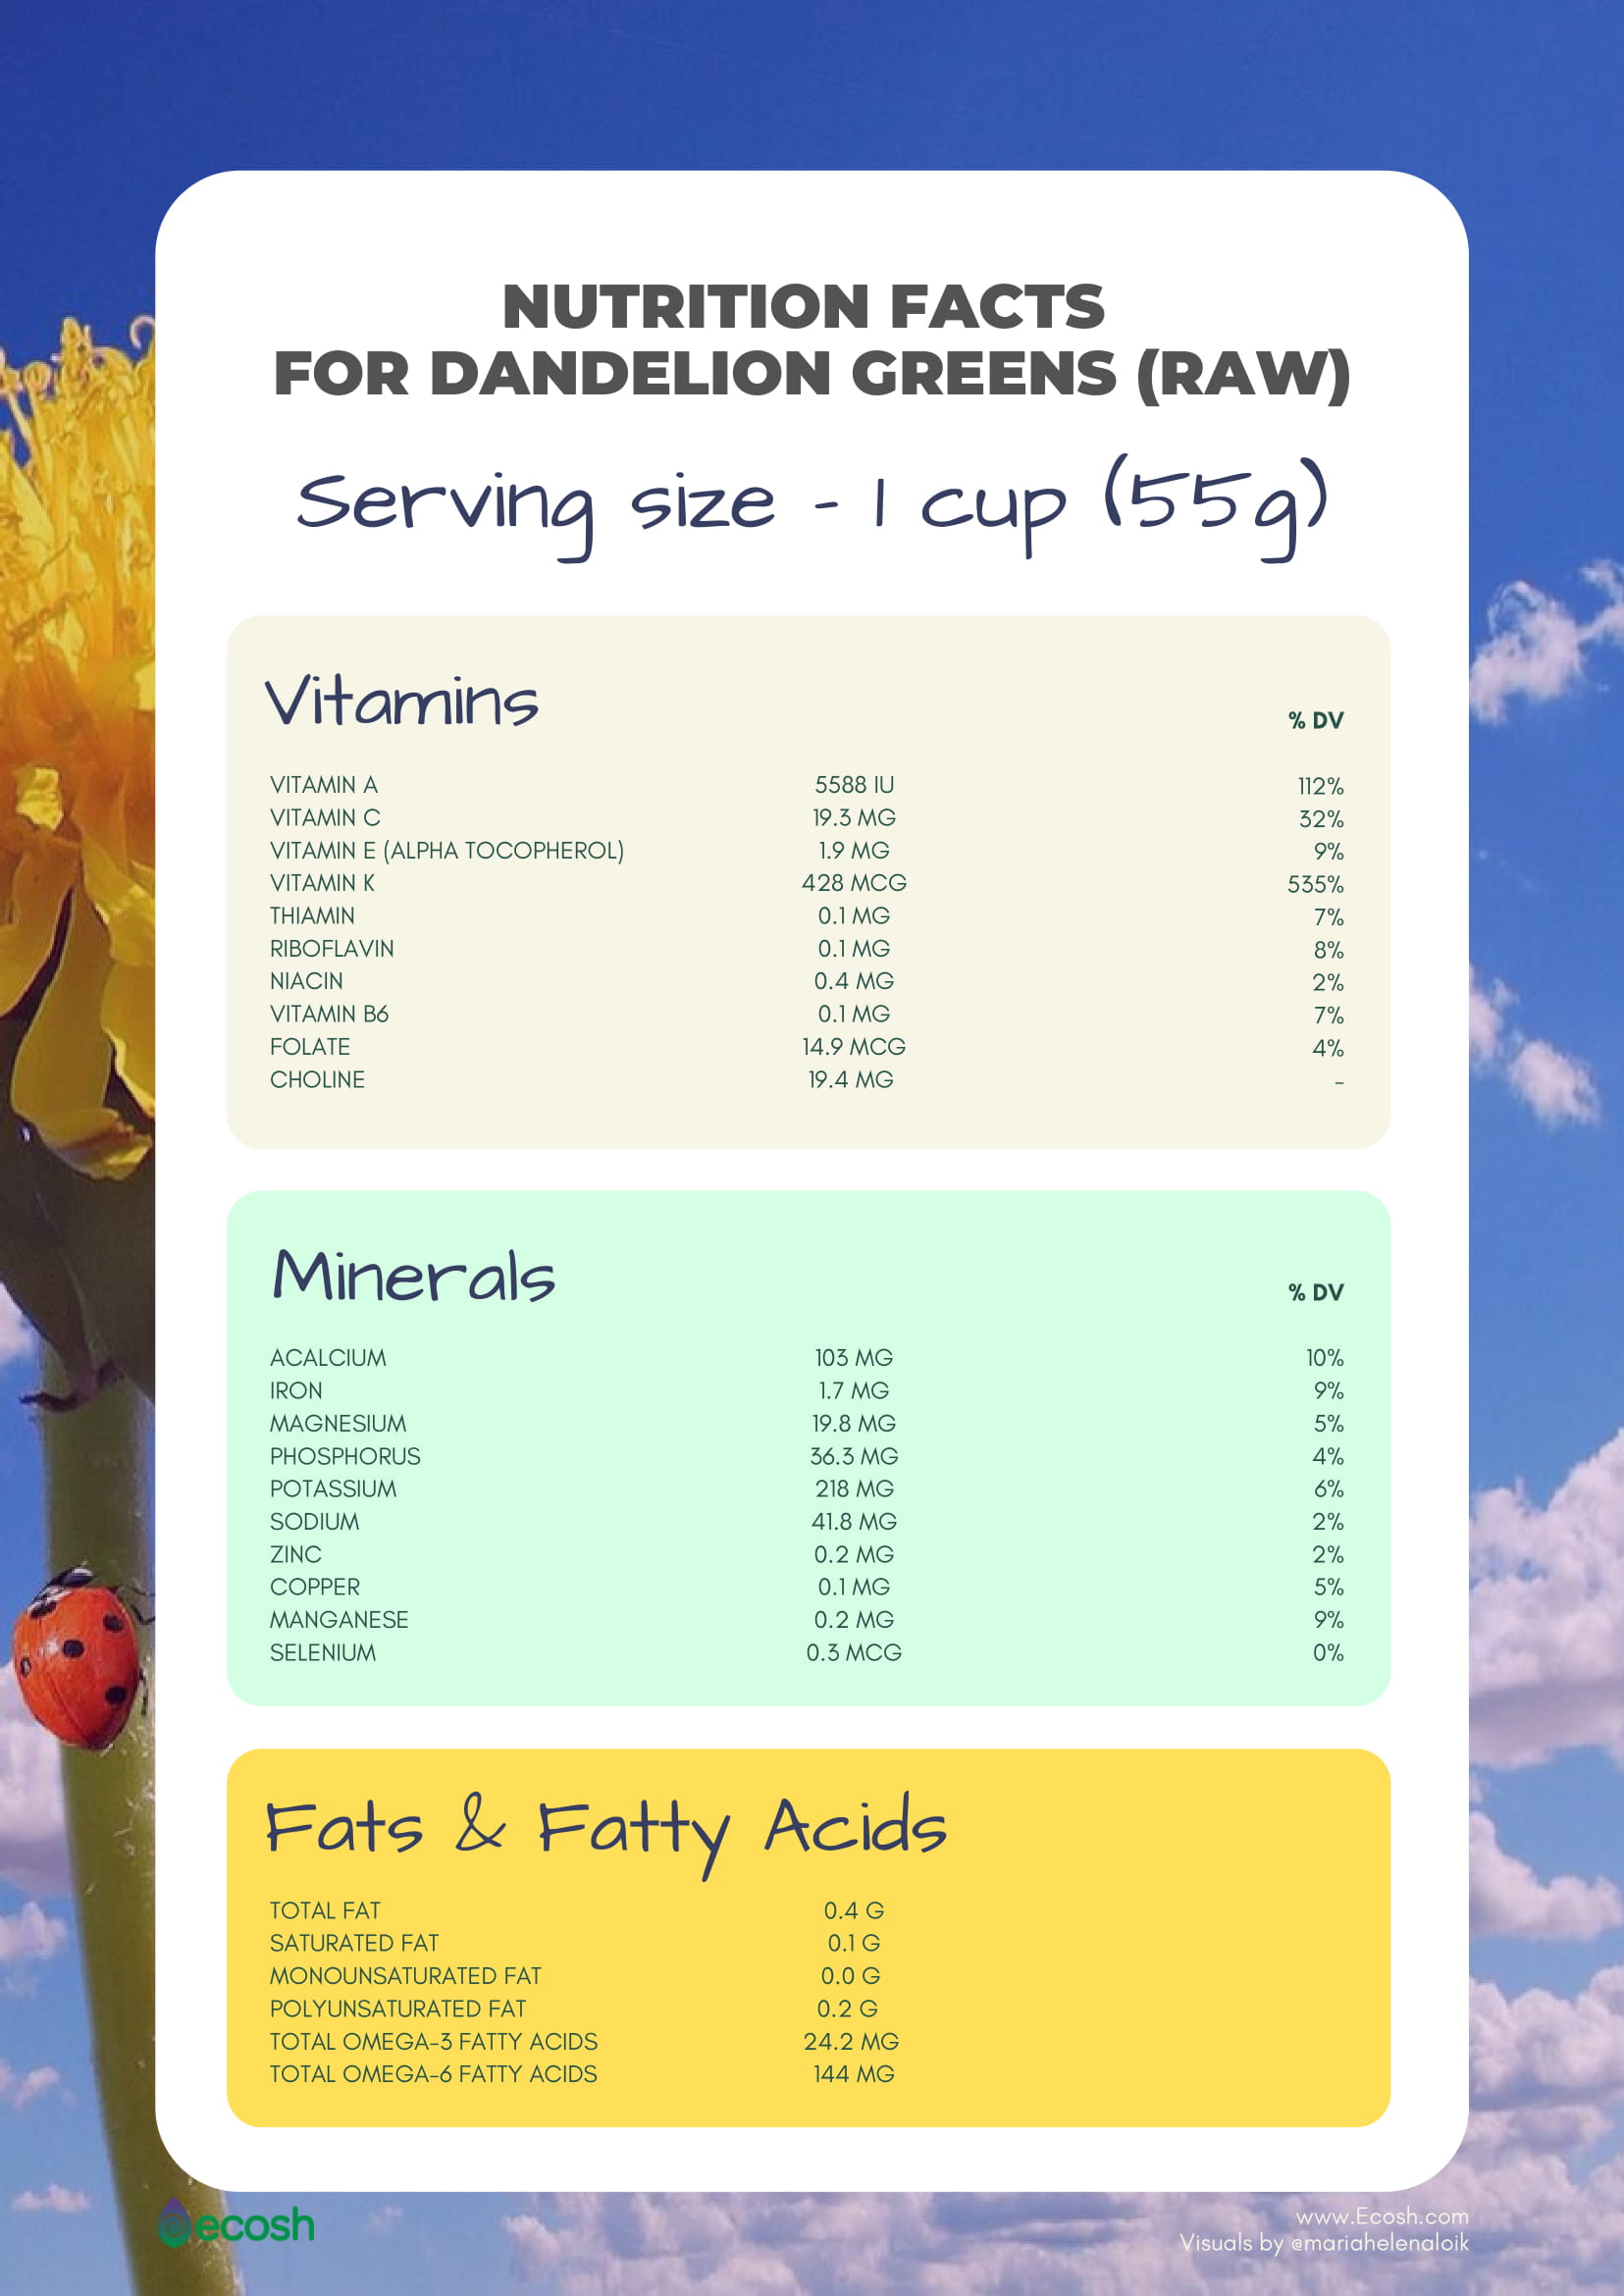 Nutritional Facts For Dandelion Greens (Raw)